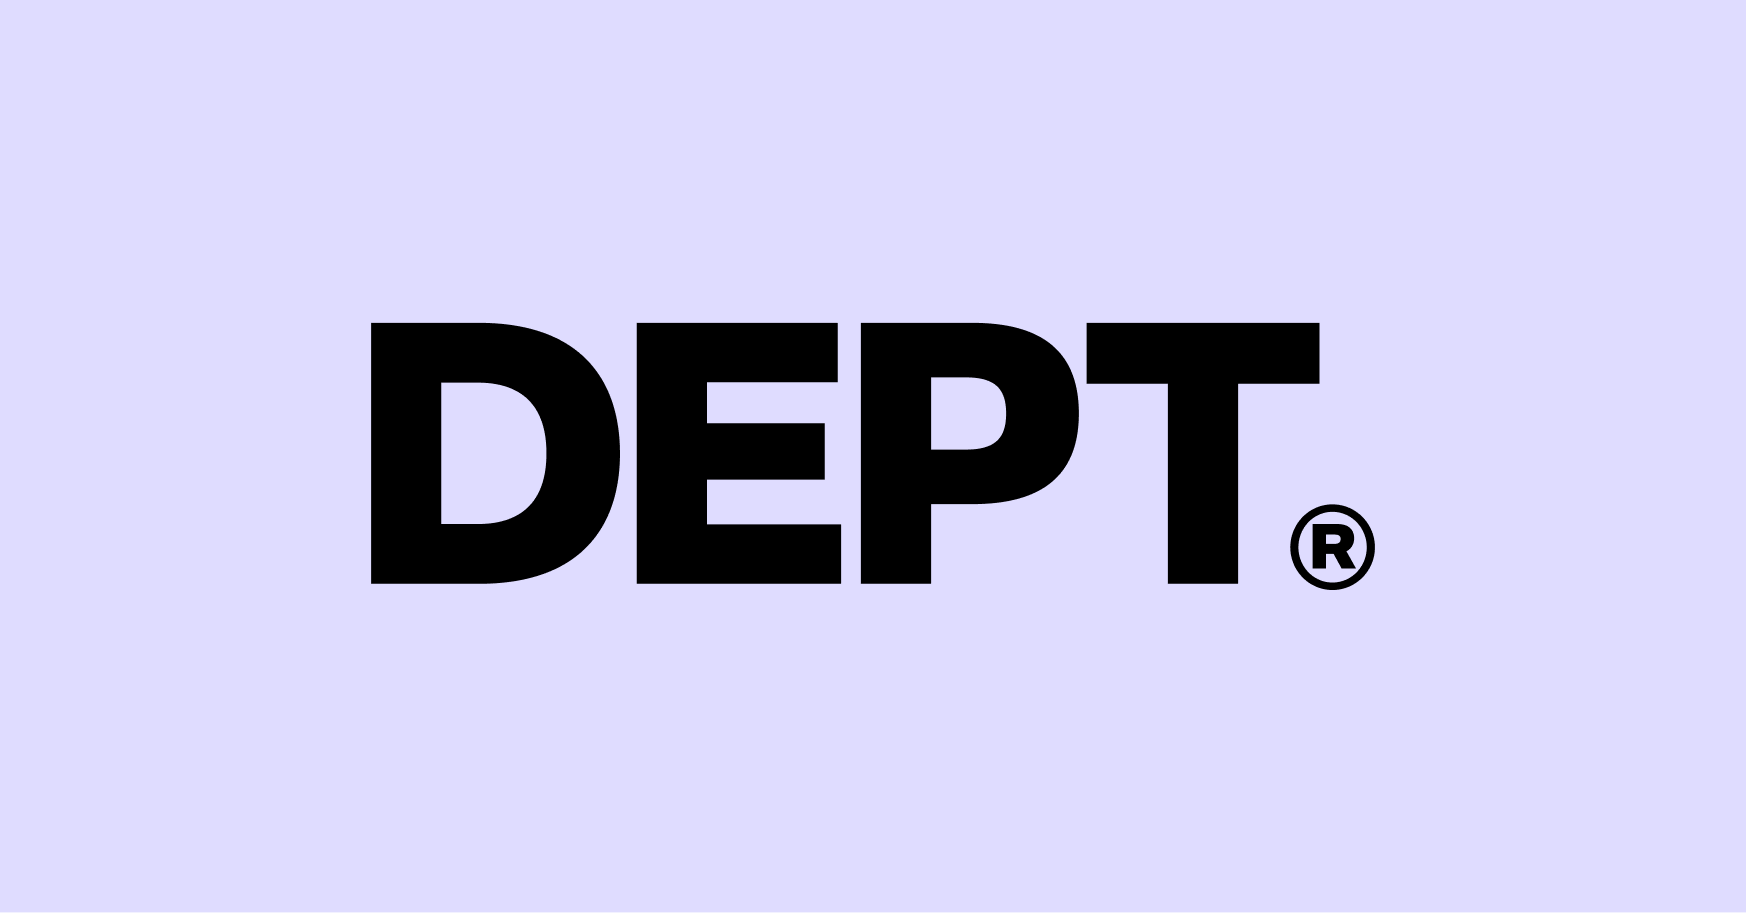 Agency DEPT logo with background